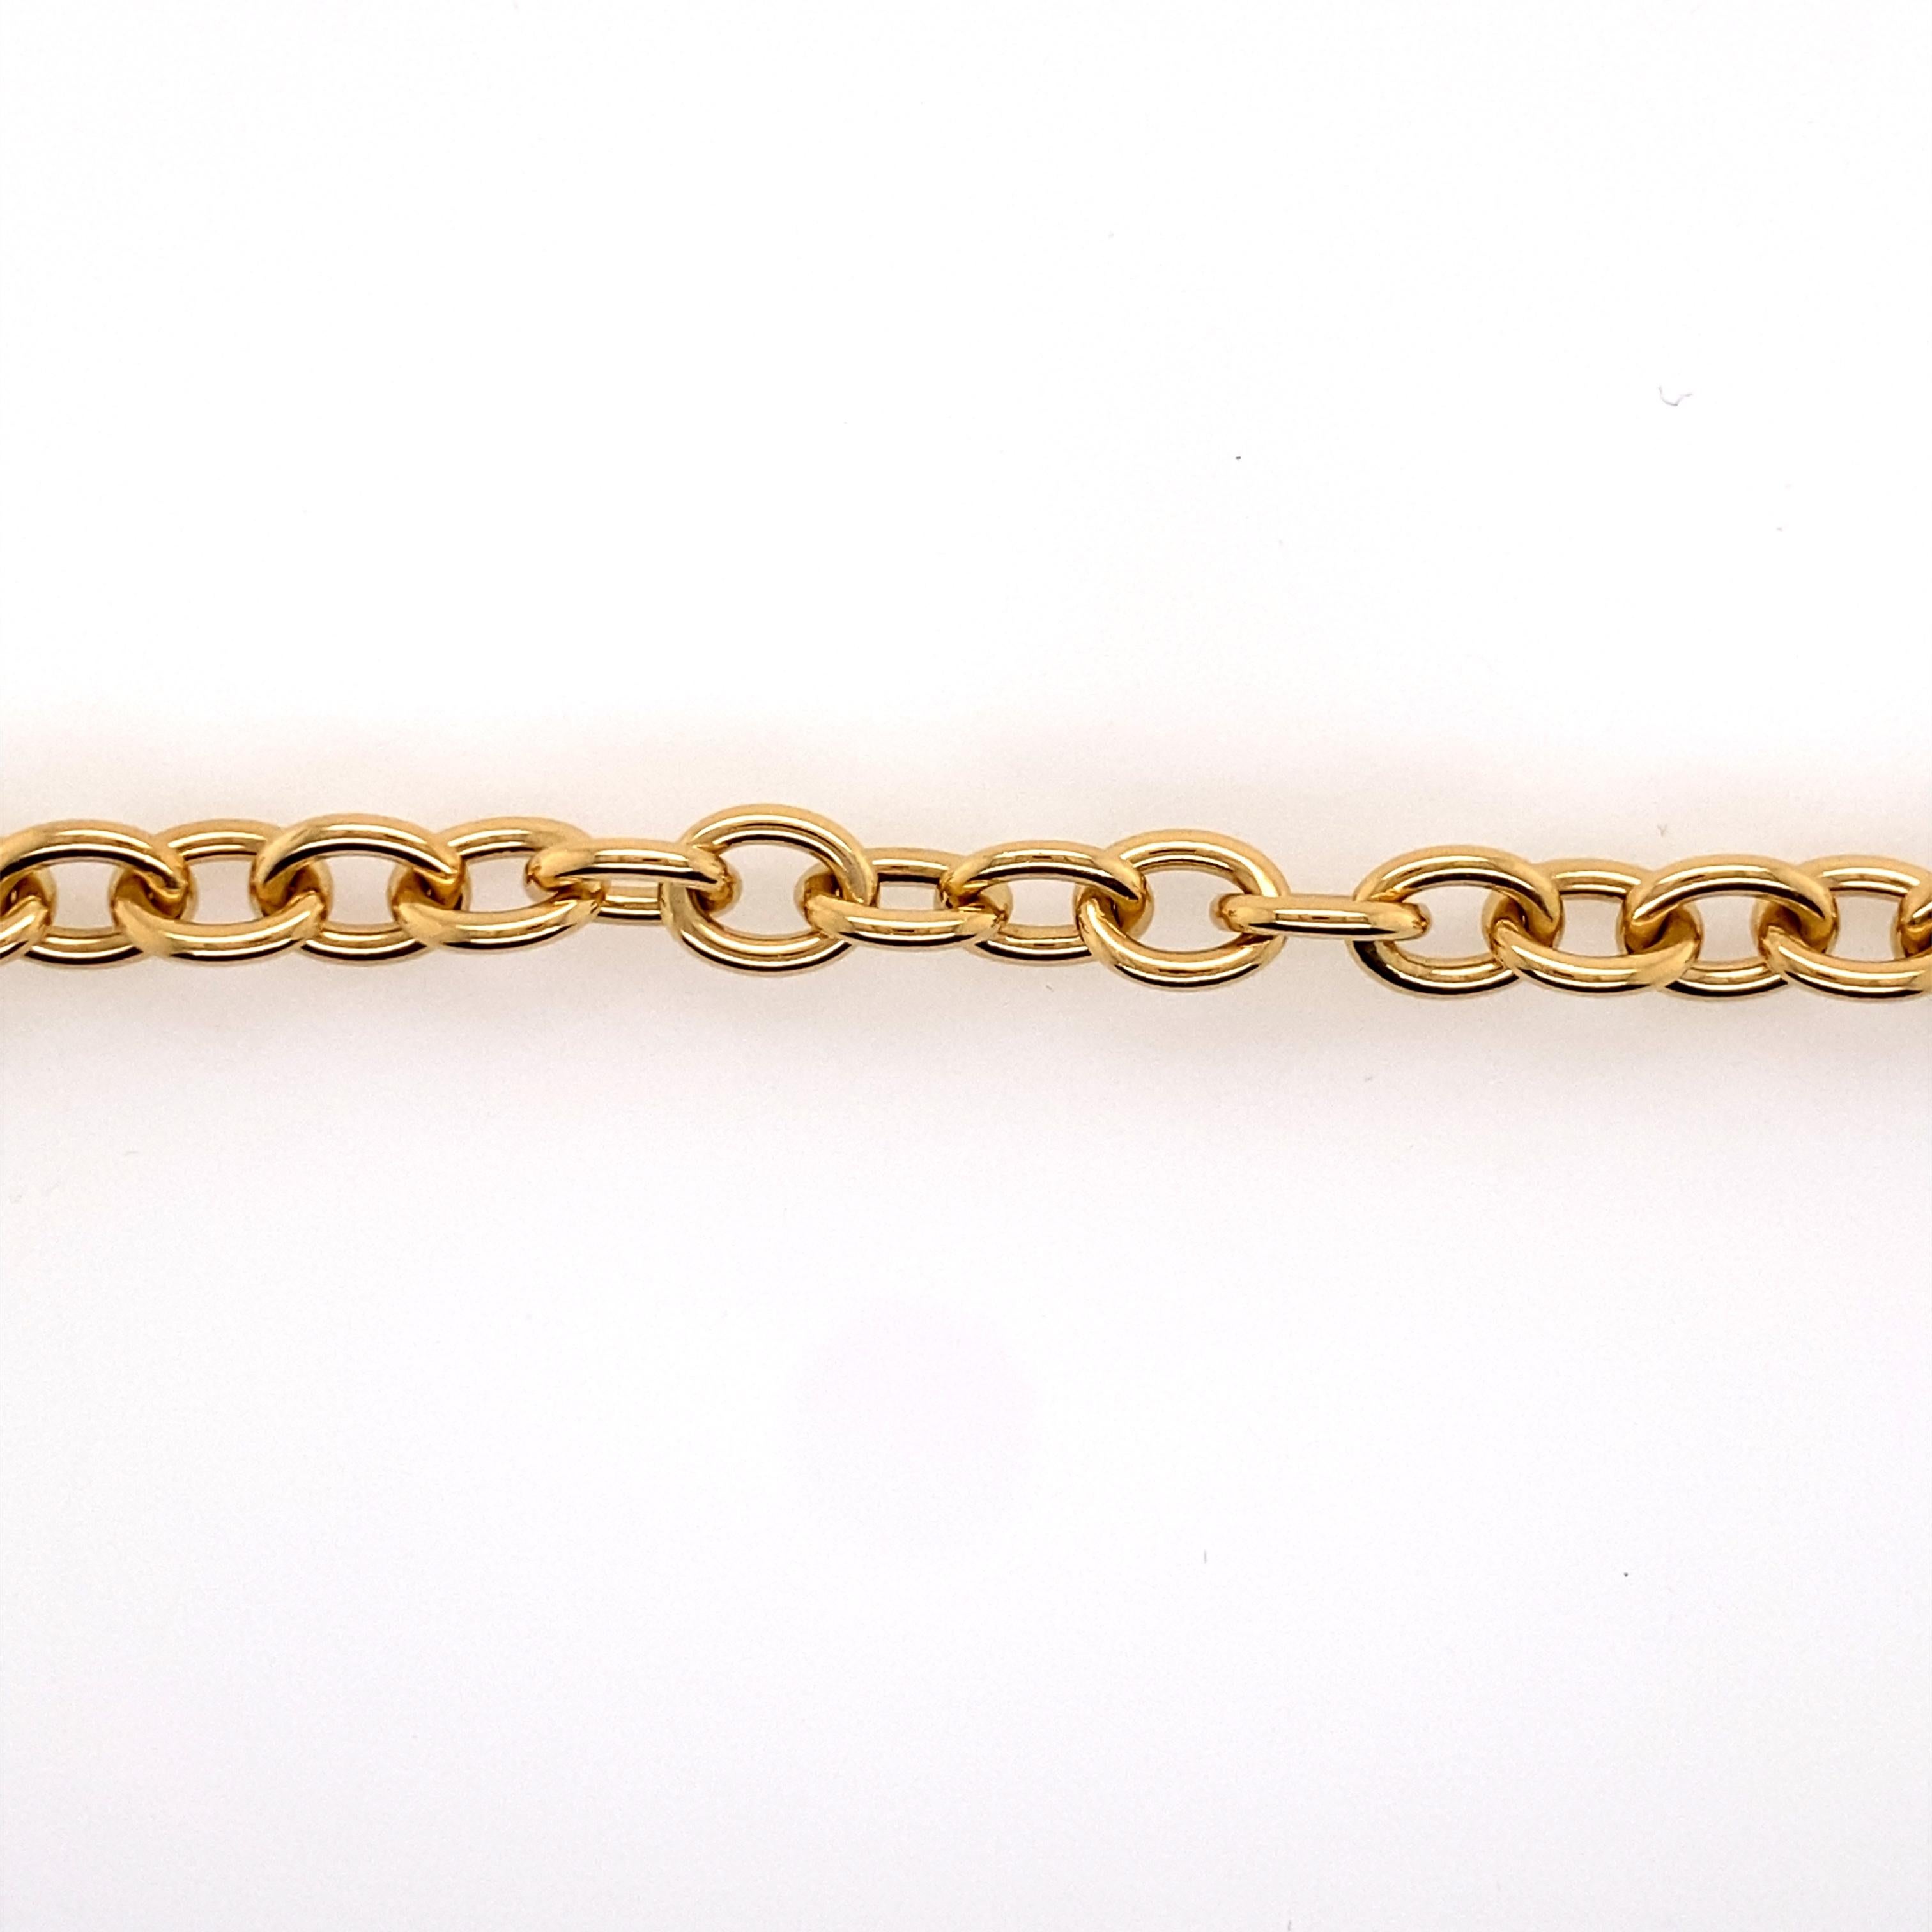 Tiffany's Vintage 1994 18 Karat Yellow Gold Heart and Arrow Bracelet In Good Condition For Sale In Boston, MA